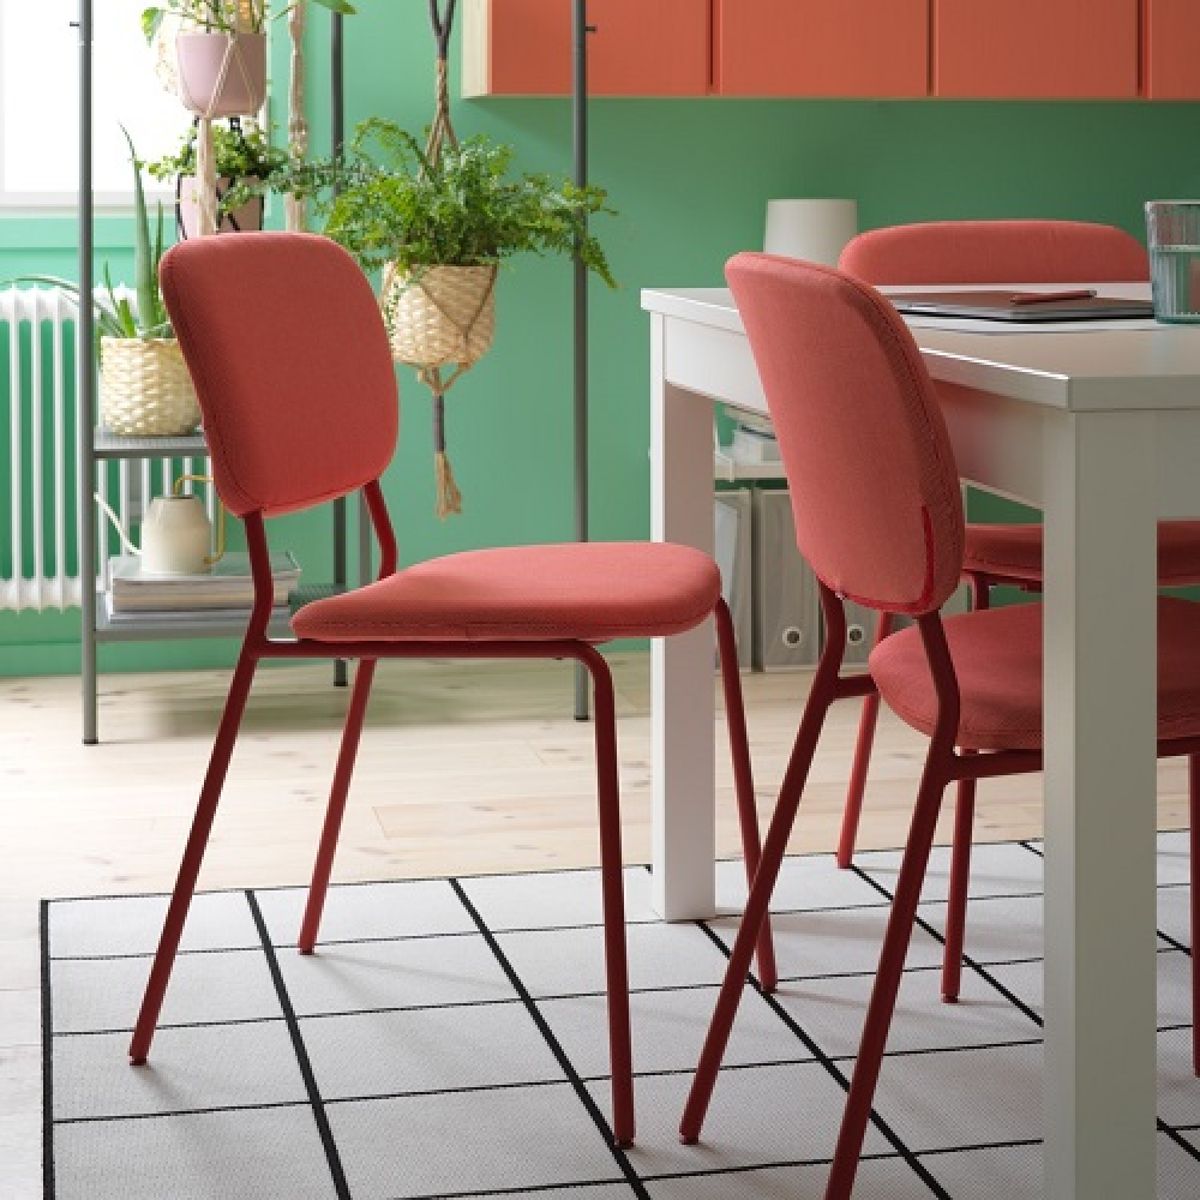 Stylish Dining Chairs Under 200, Red Wooden Chairs Ikea